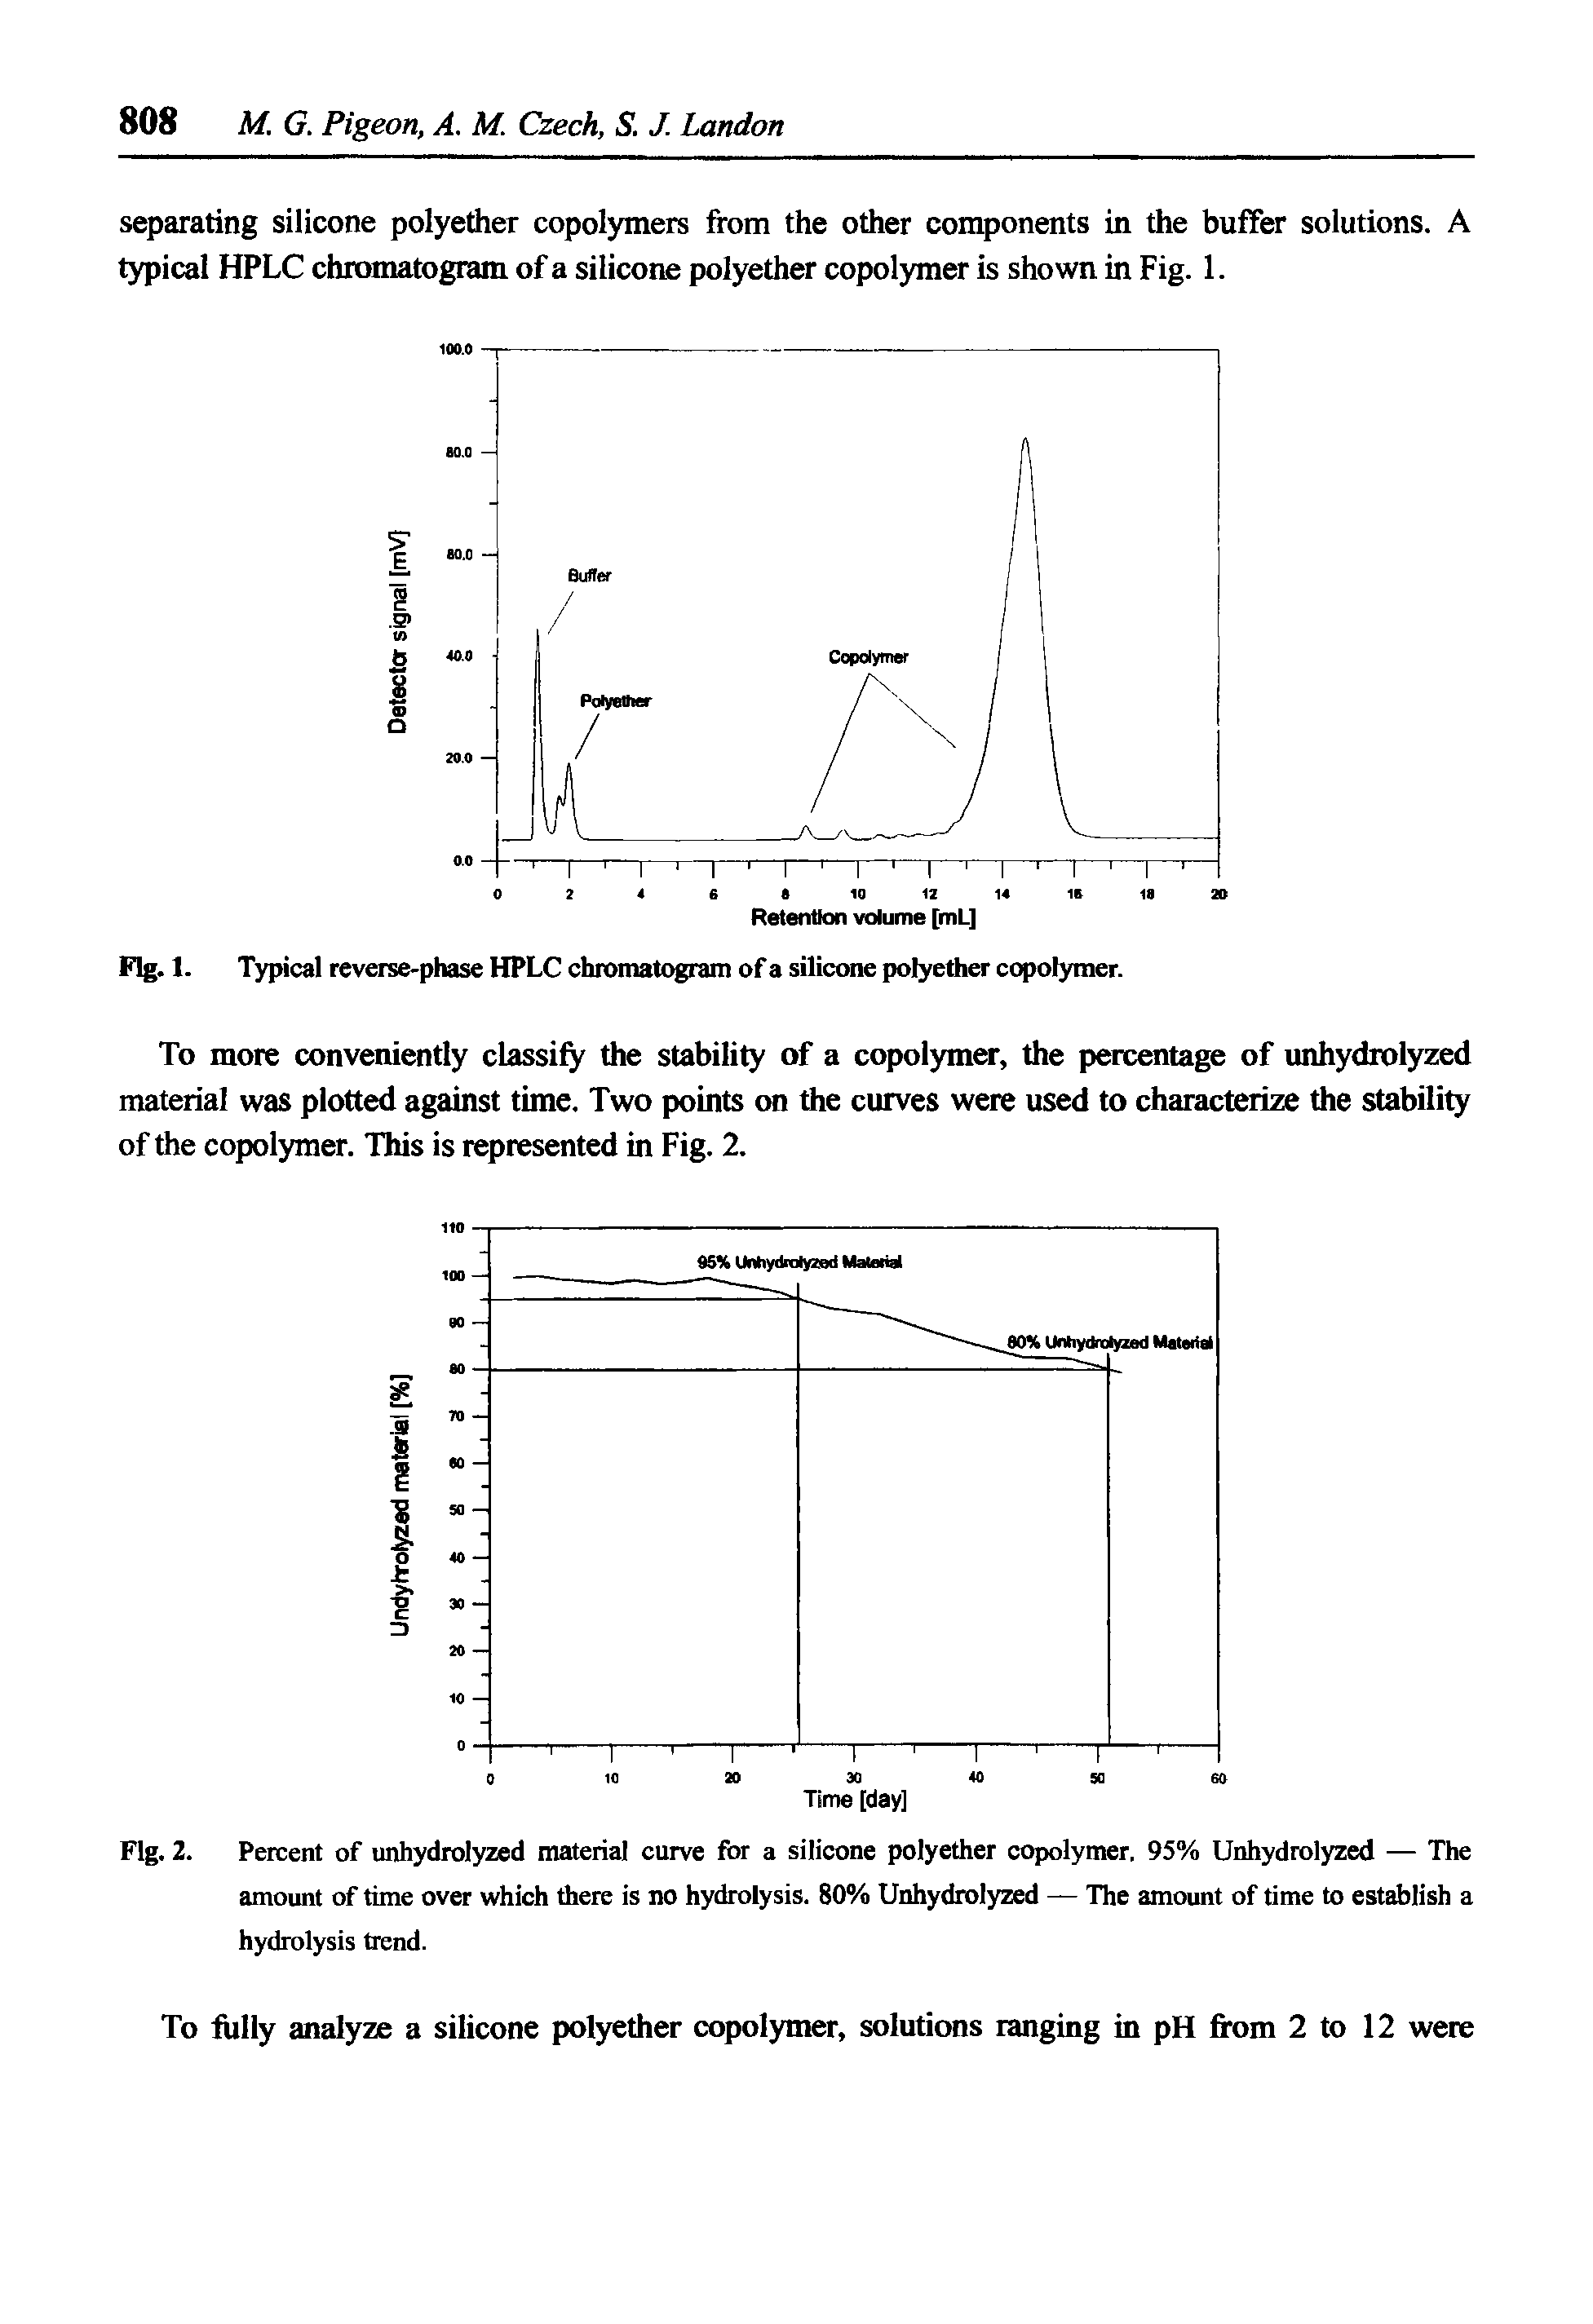 Fig. 2. Percent of unhydrolyzed material curve for a silicone polyether copolymer, 95% Unhydrolyzed — The amount of time over which there is no hydrolysis. 80% Unhydiolyzed — The amount of time to establish a hydrolysis trend.